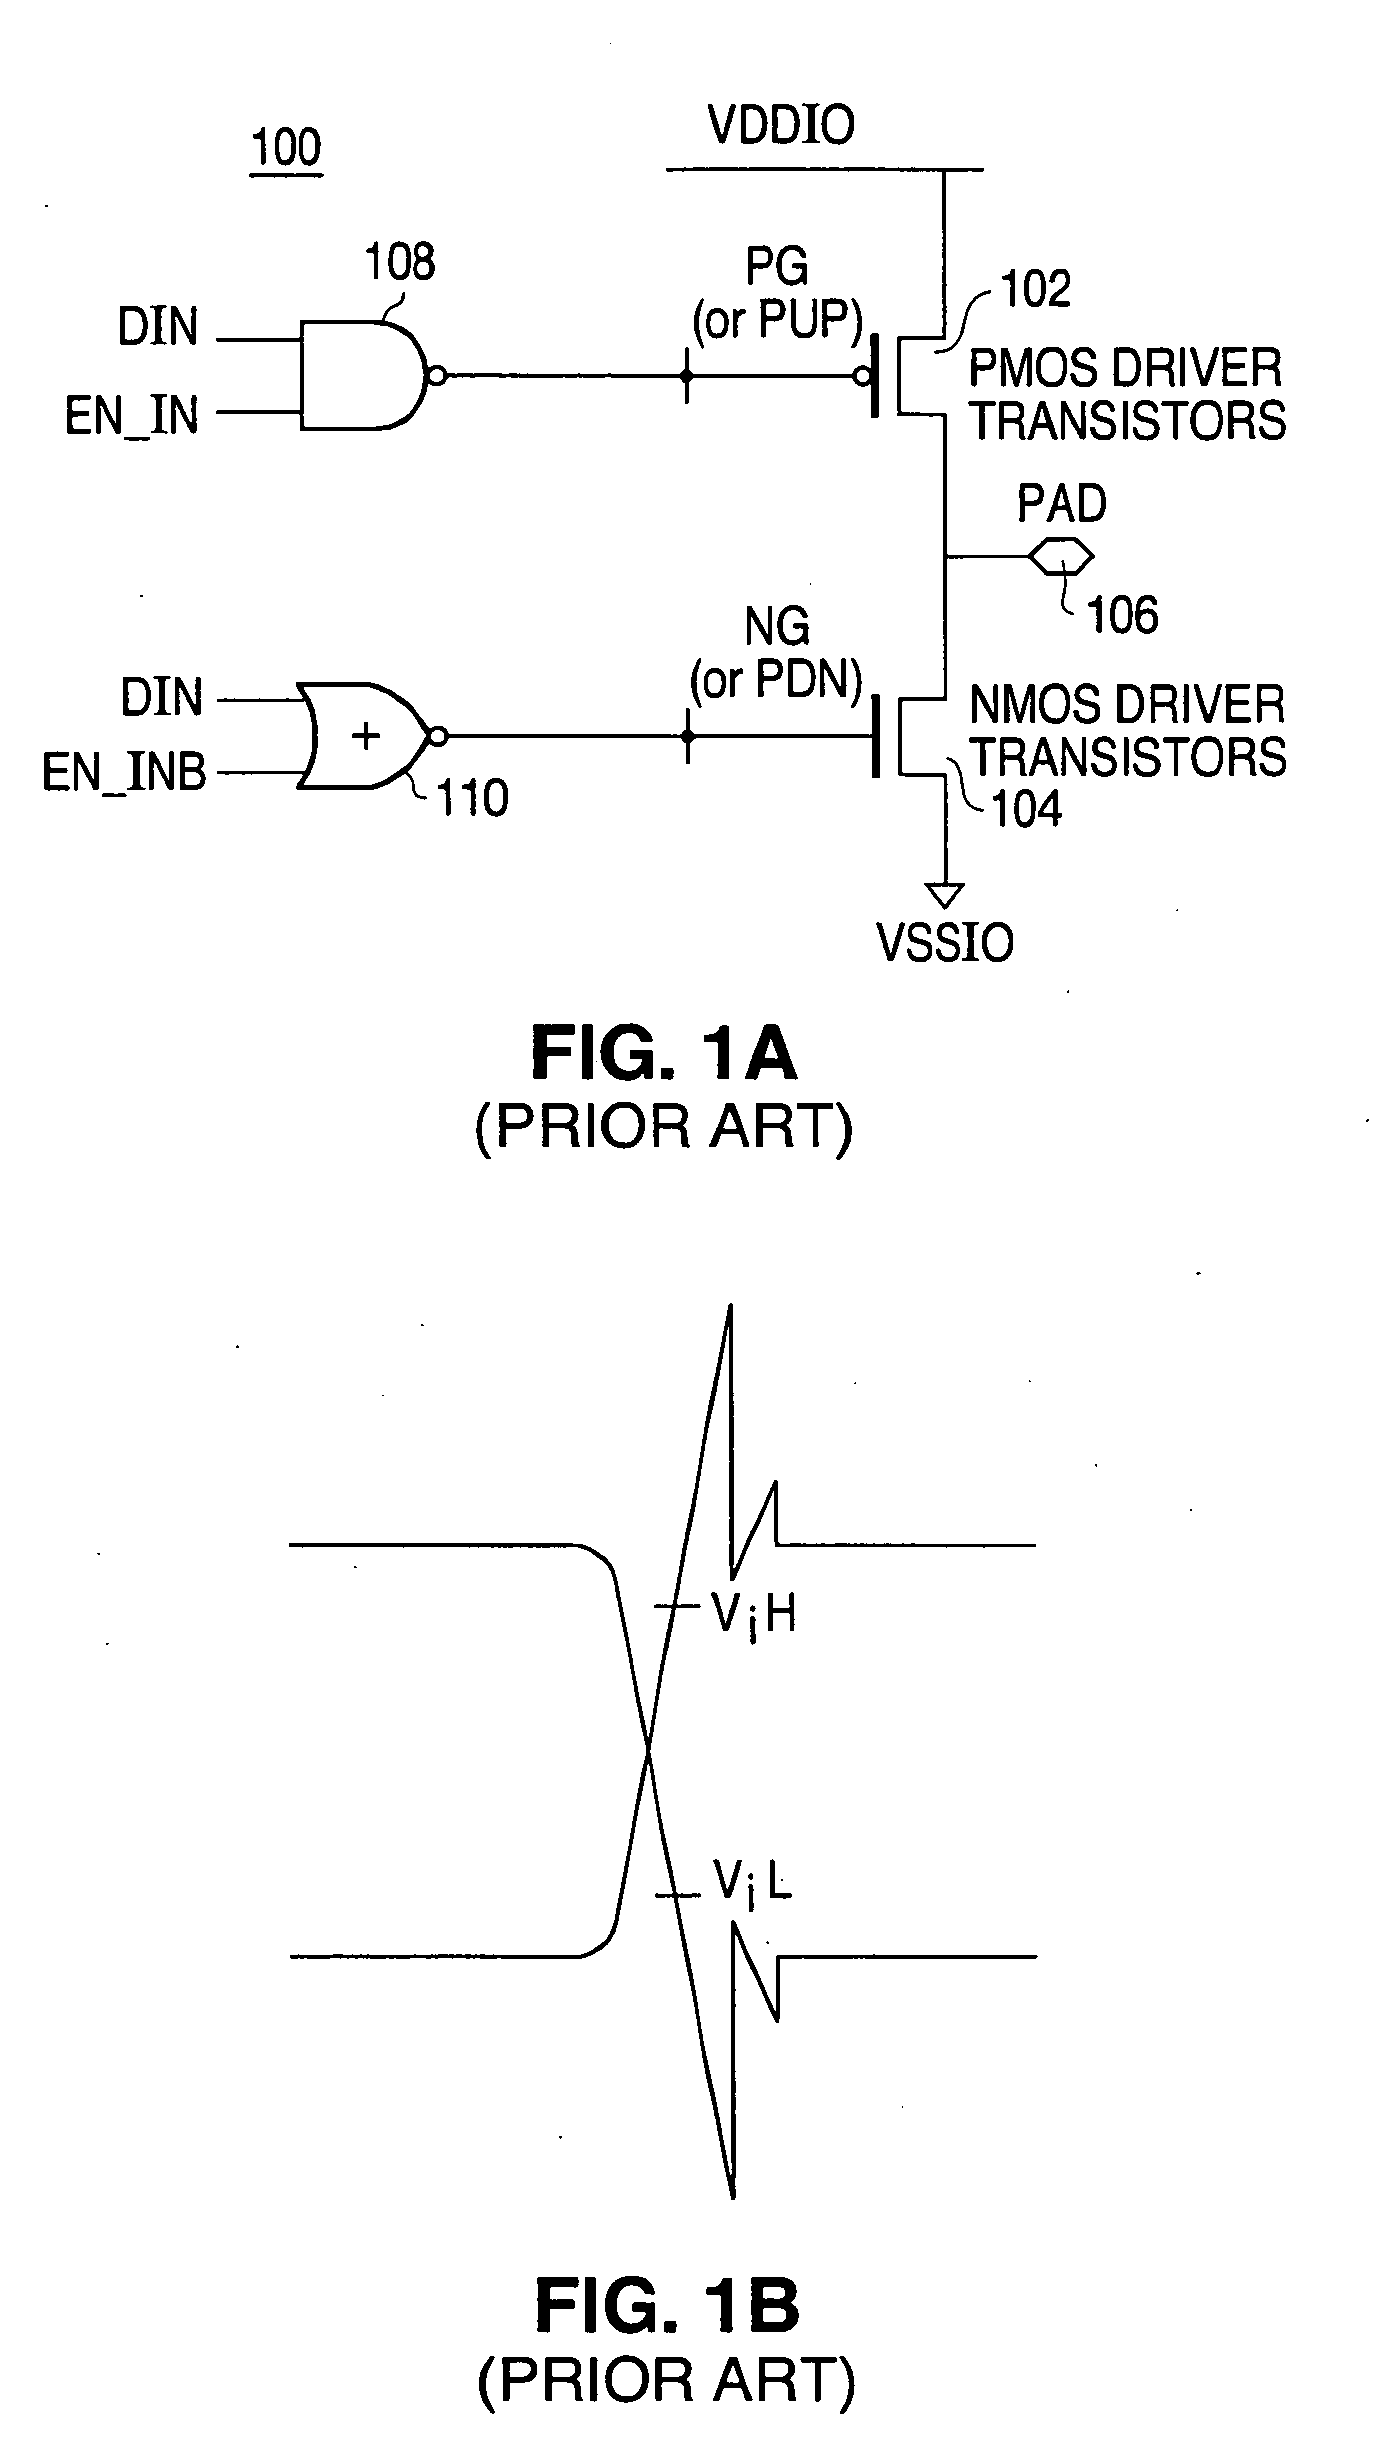 Load sense and active noise reduction for I/O circuit